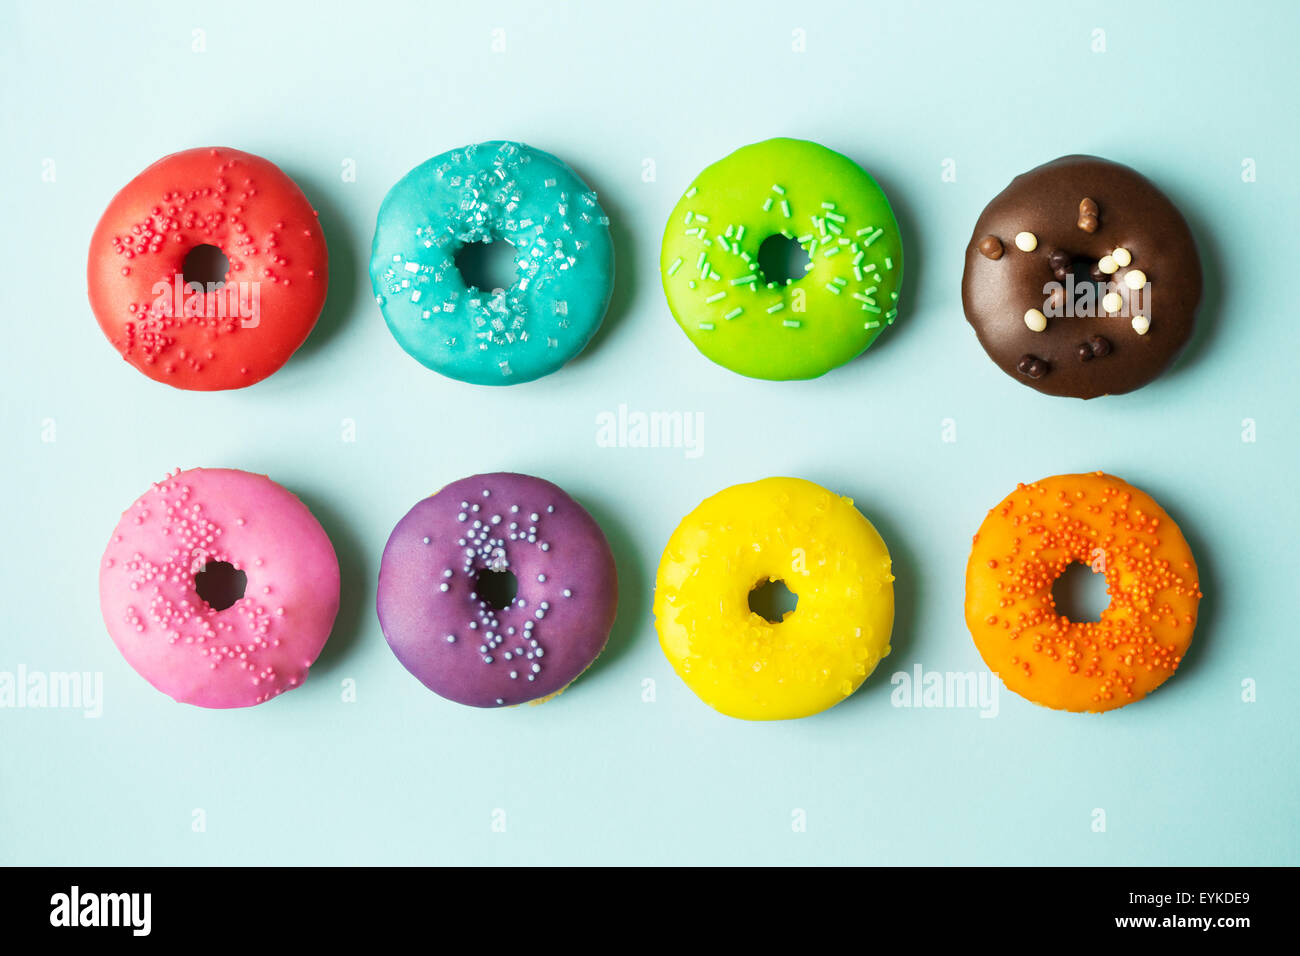 Colorful donuts on a blue background Stock Photo